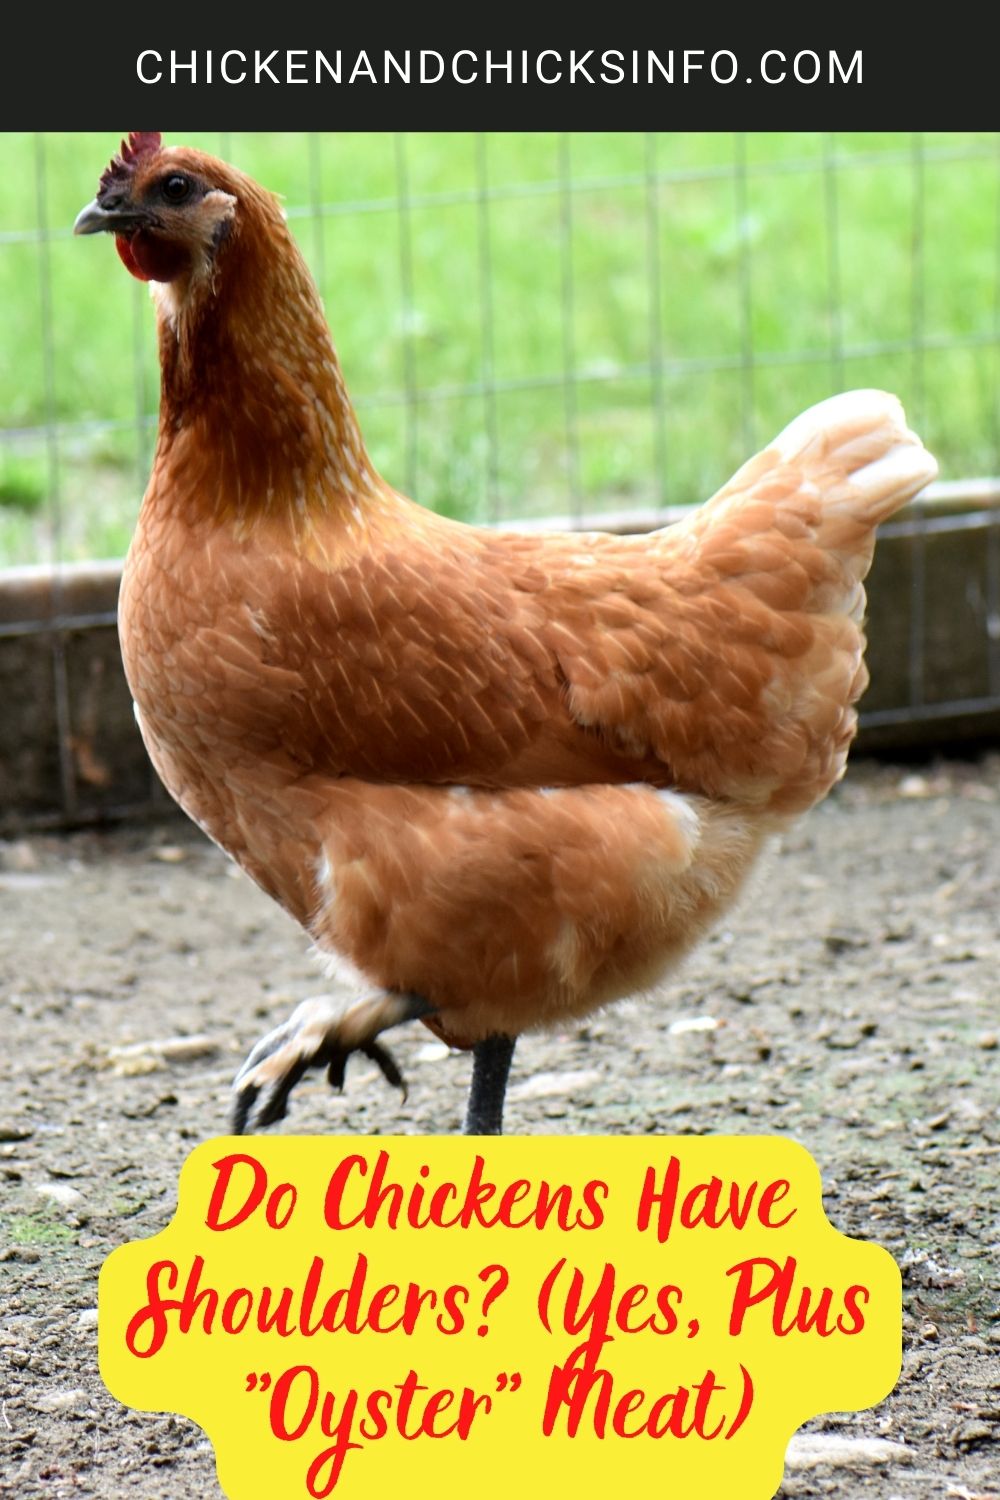 Do Chickens Have Shoulders? (Yes, Plus "Oyster" Meat) poster.
